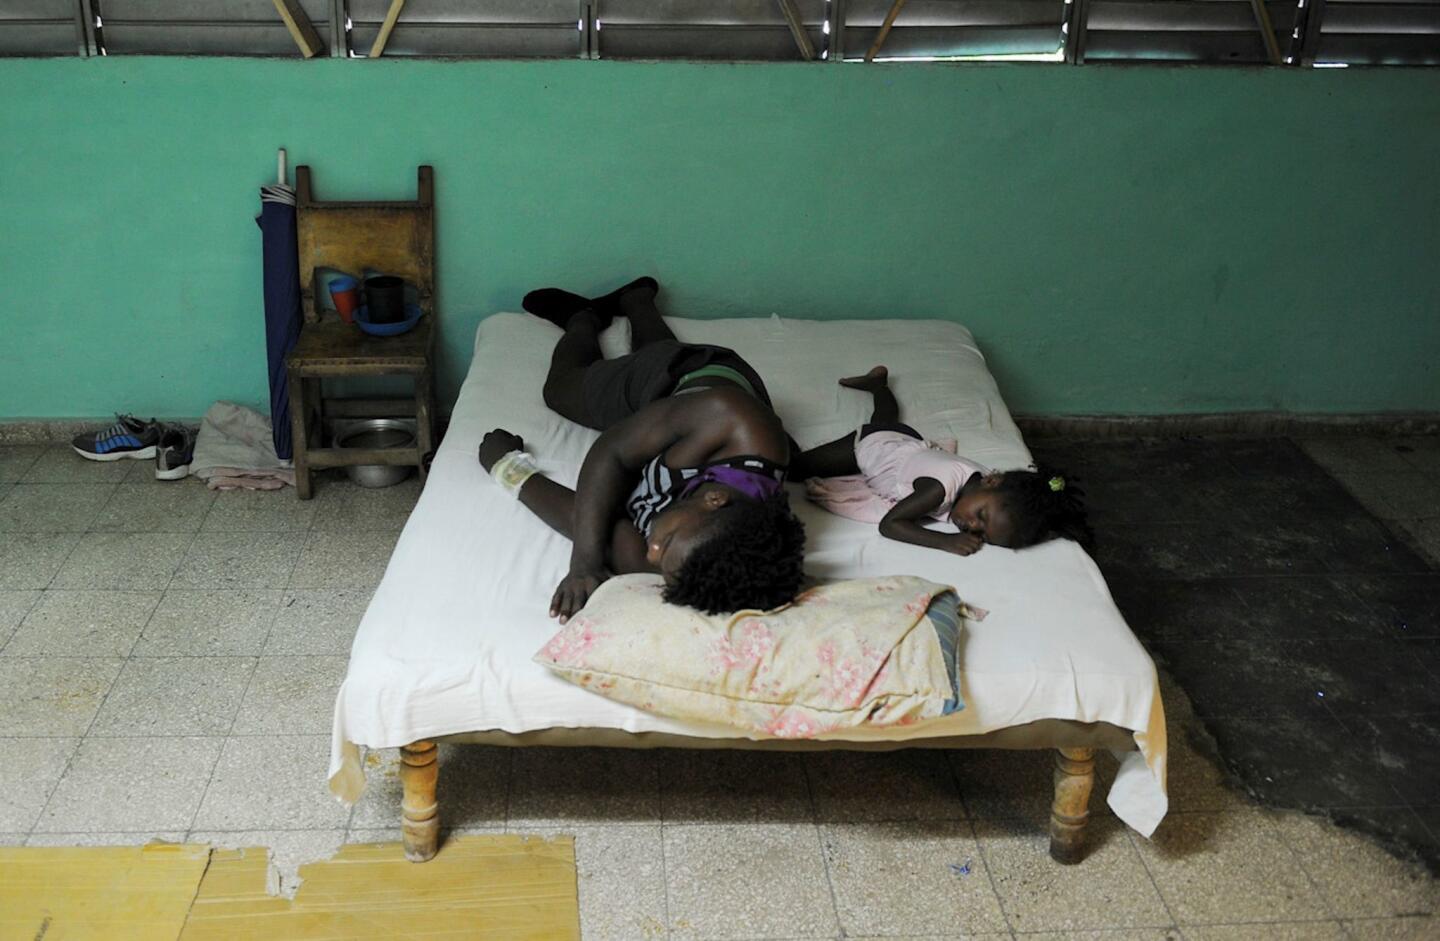 People sleep at a shelter in Guantanamo city, Cuba, on Oct. 4, 2016 ahead of the arrival of Hurricane Matthew.